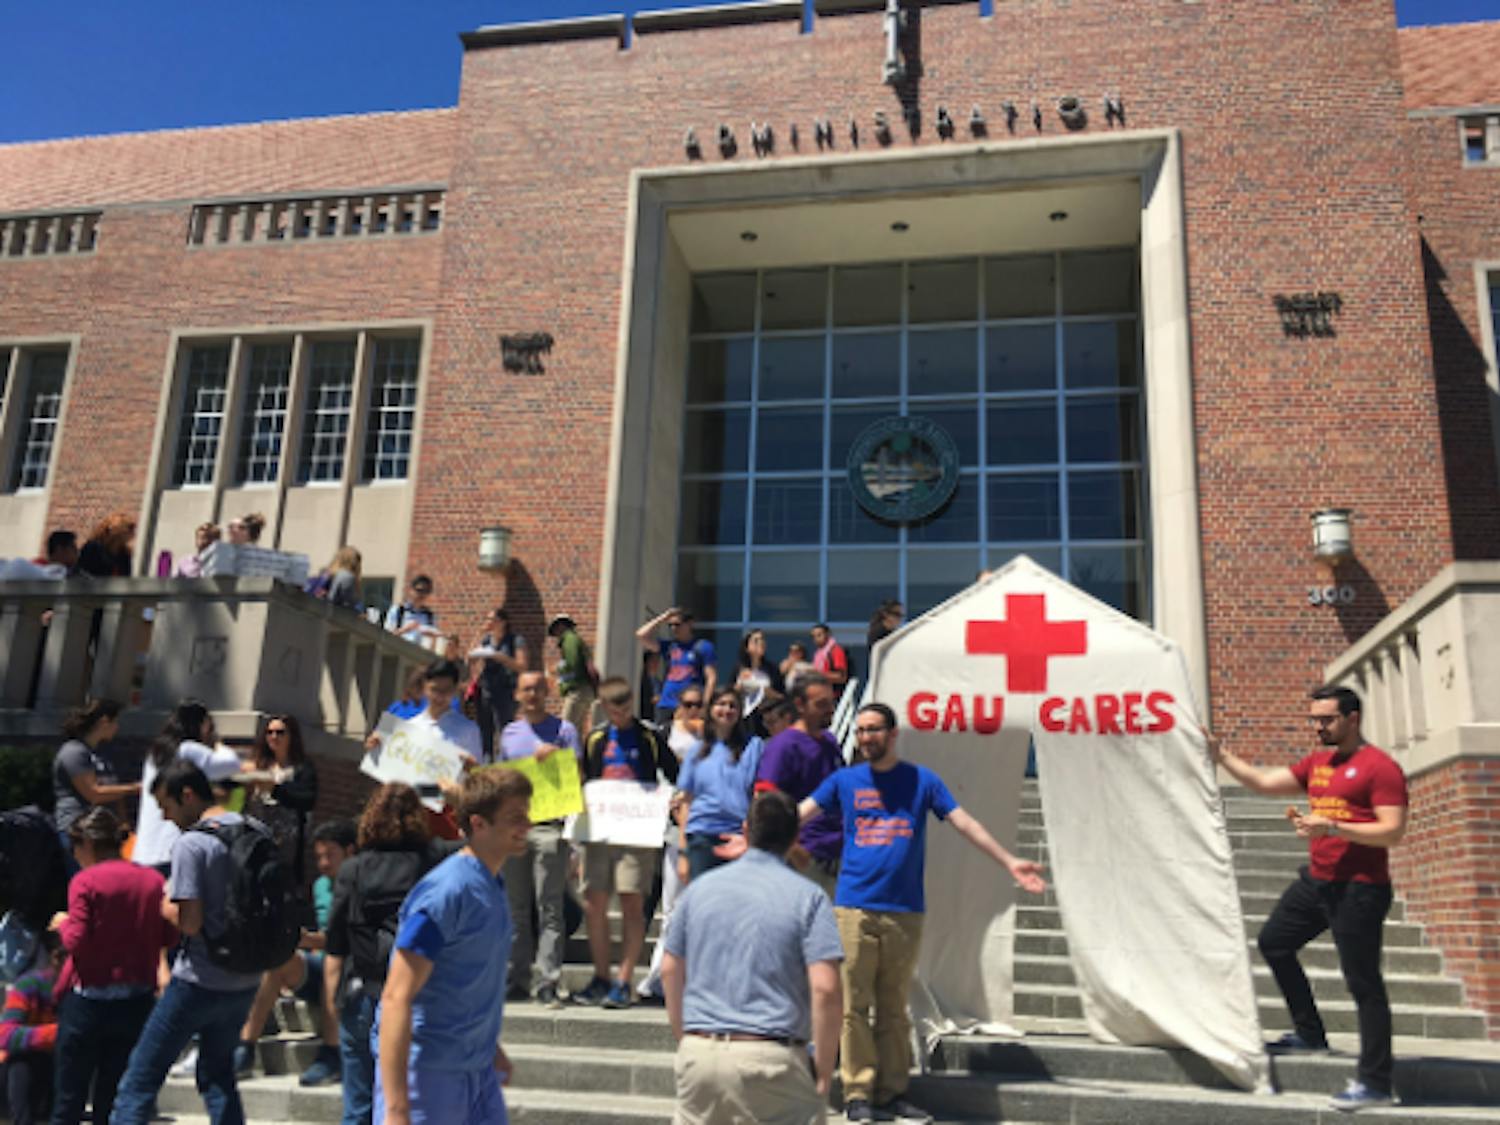 For about an hour Friday, about 50 people all sat around a light tan, pentagon cloth sign, with a slit down the middle and a red painted health care “plus” sign and the words, “GAU CARES” underneath.